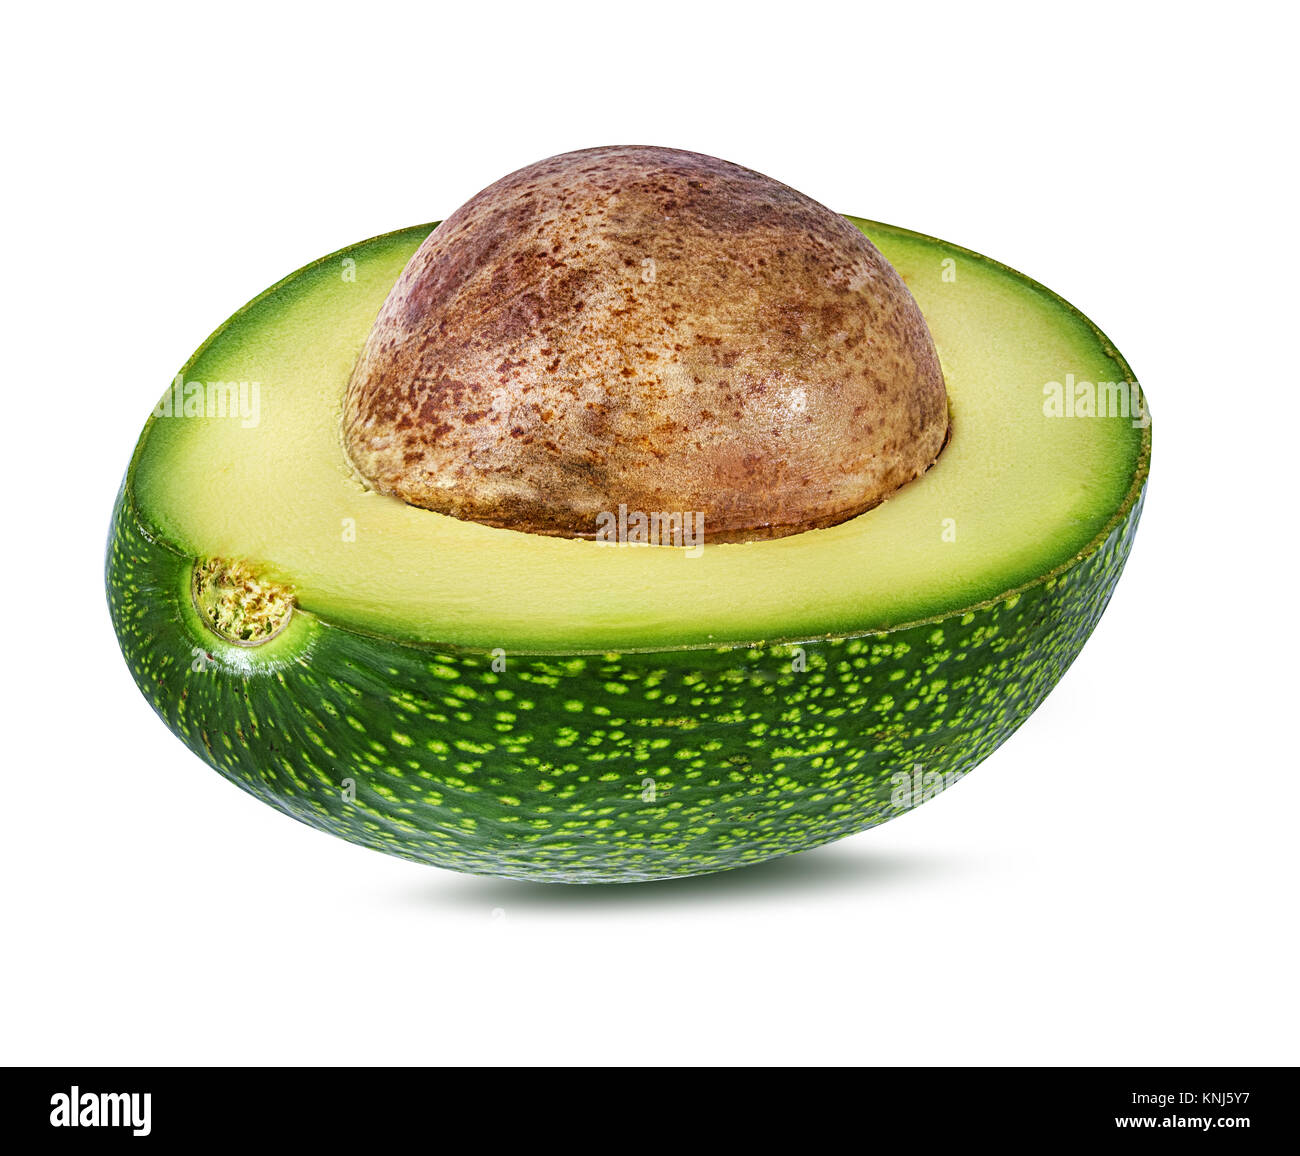 Open Mesh Bag with Fresh Hass Avocados Isolated on White Stock